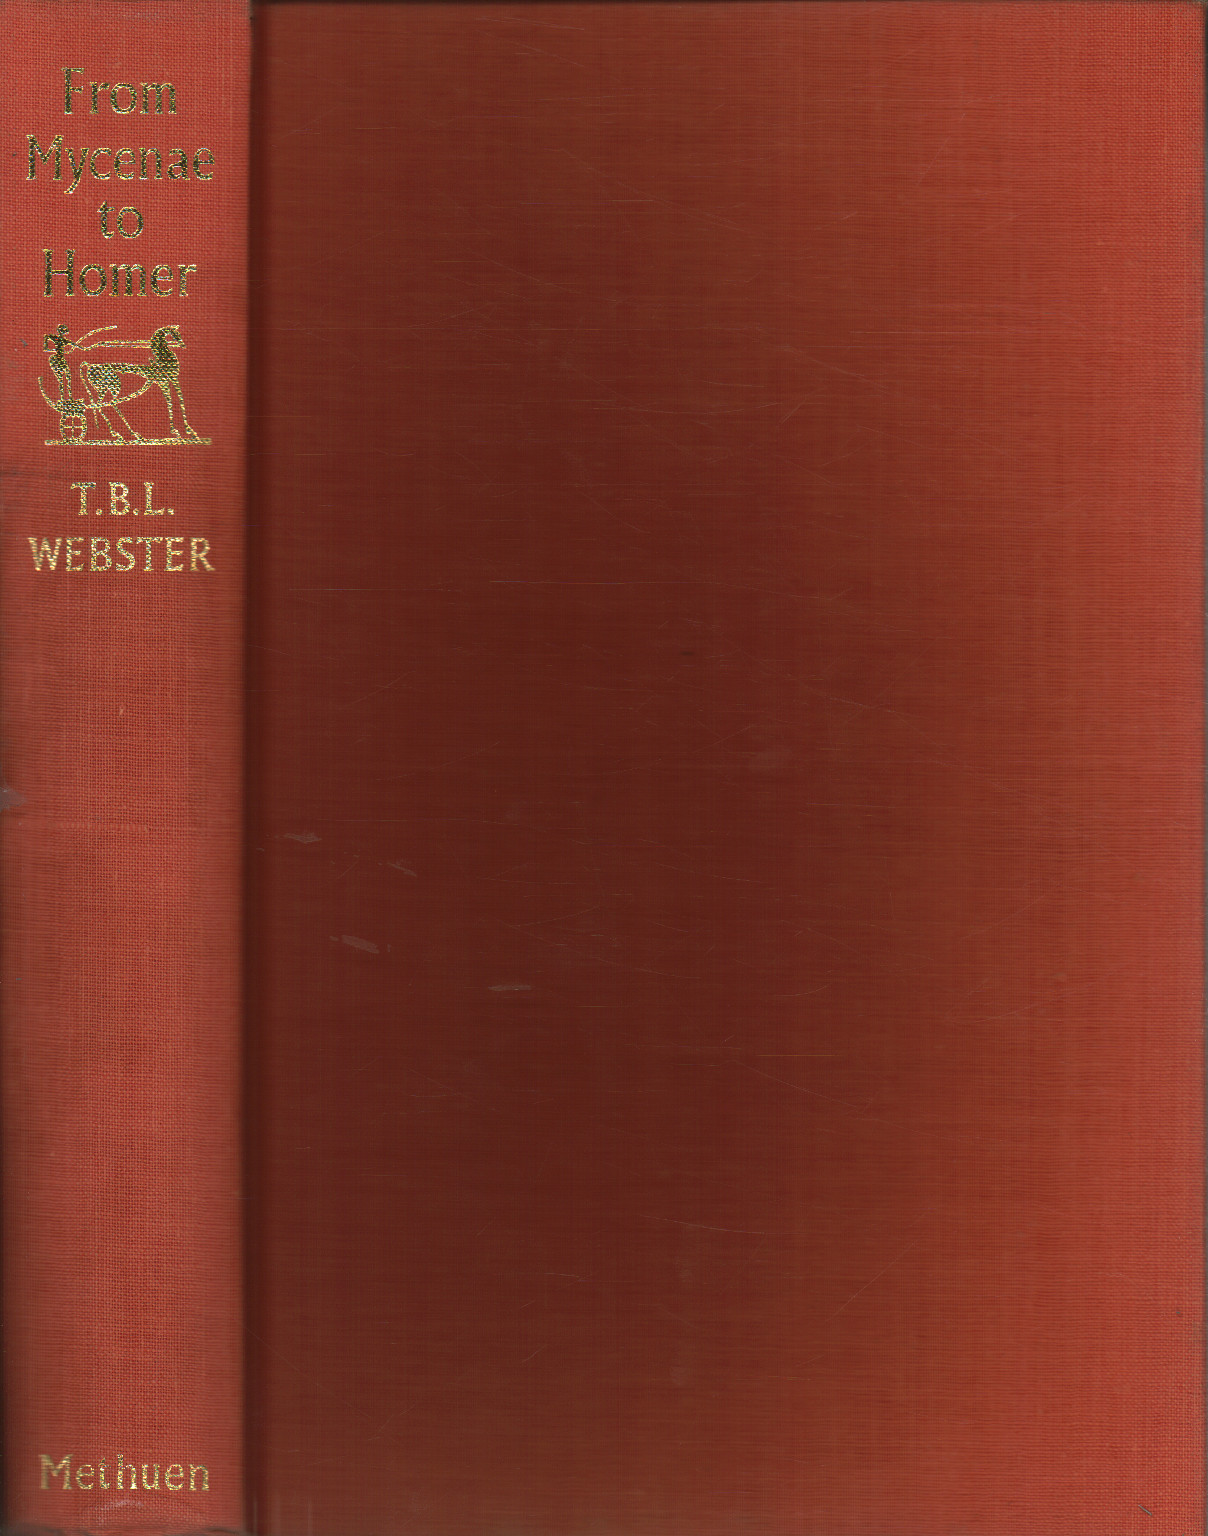 From Mycenae to Homer T. B. L. Webster